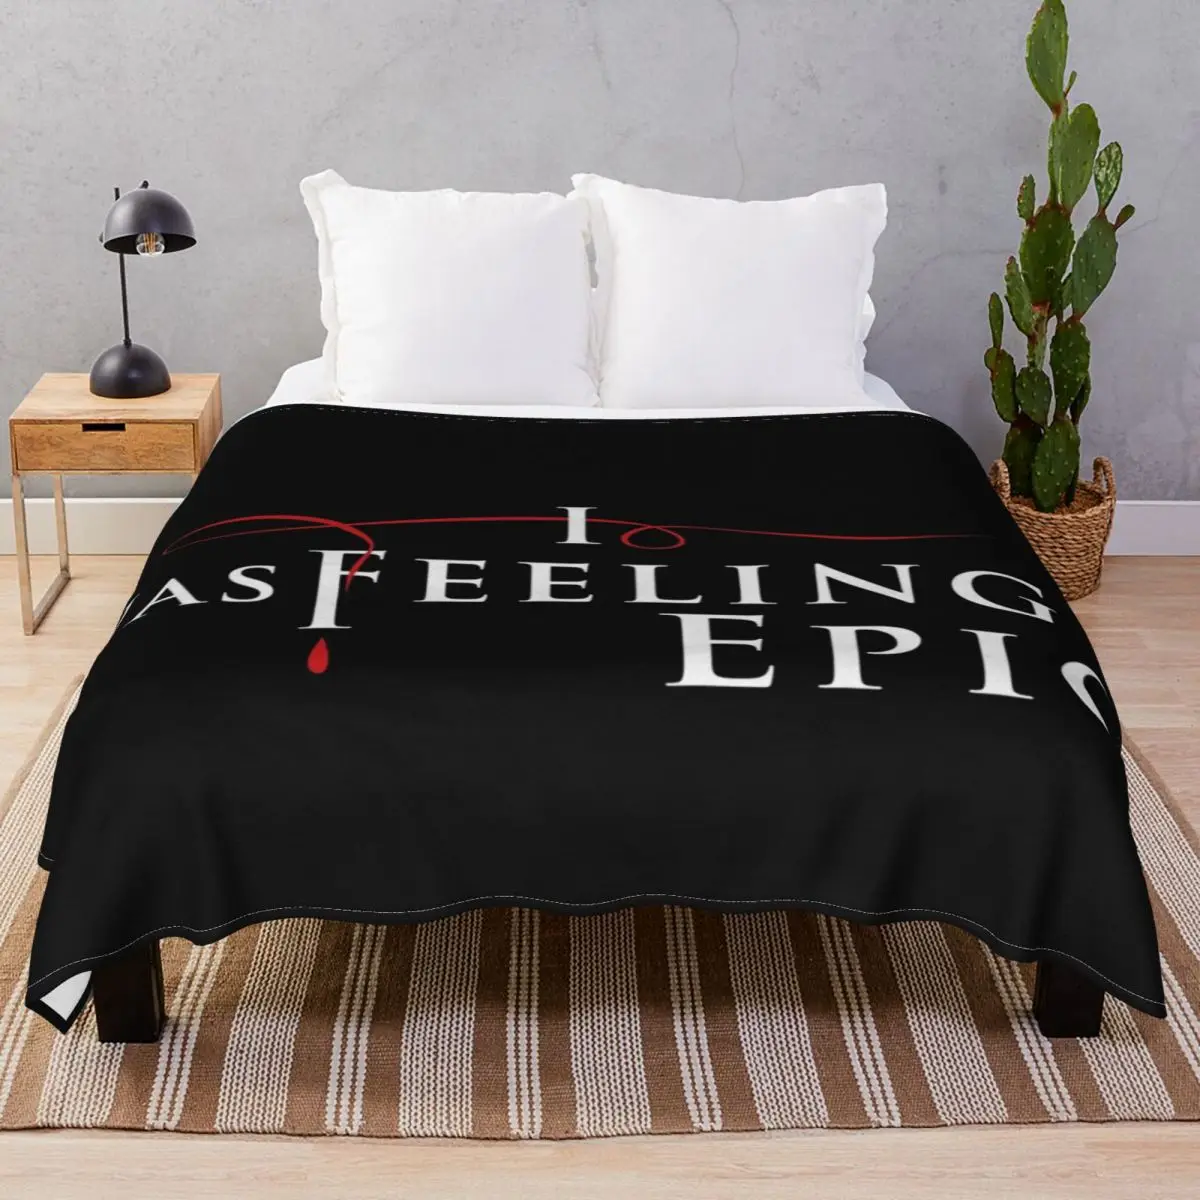 I Was Feeling Epic In TVD Blanket Flannel All Season Lightweight Thin Throw Blankets for Bedding Sofa Travel Office